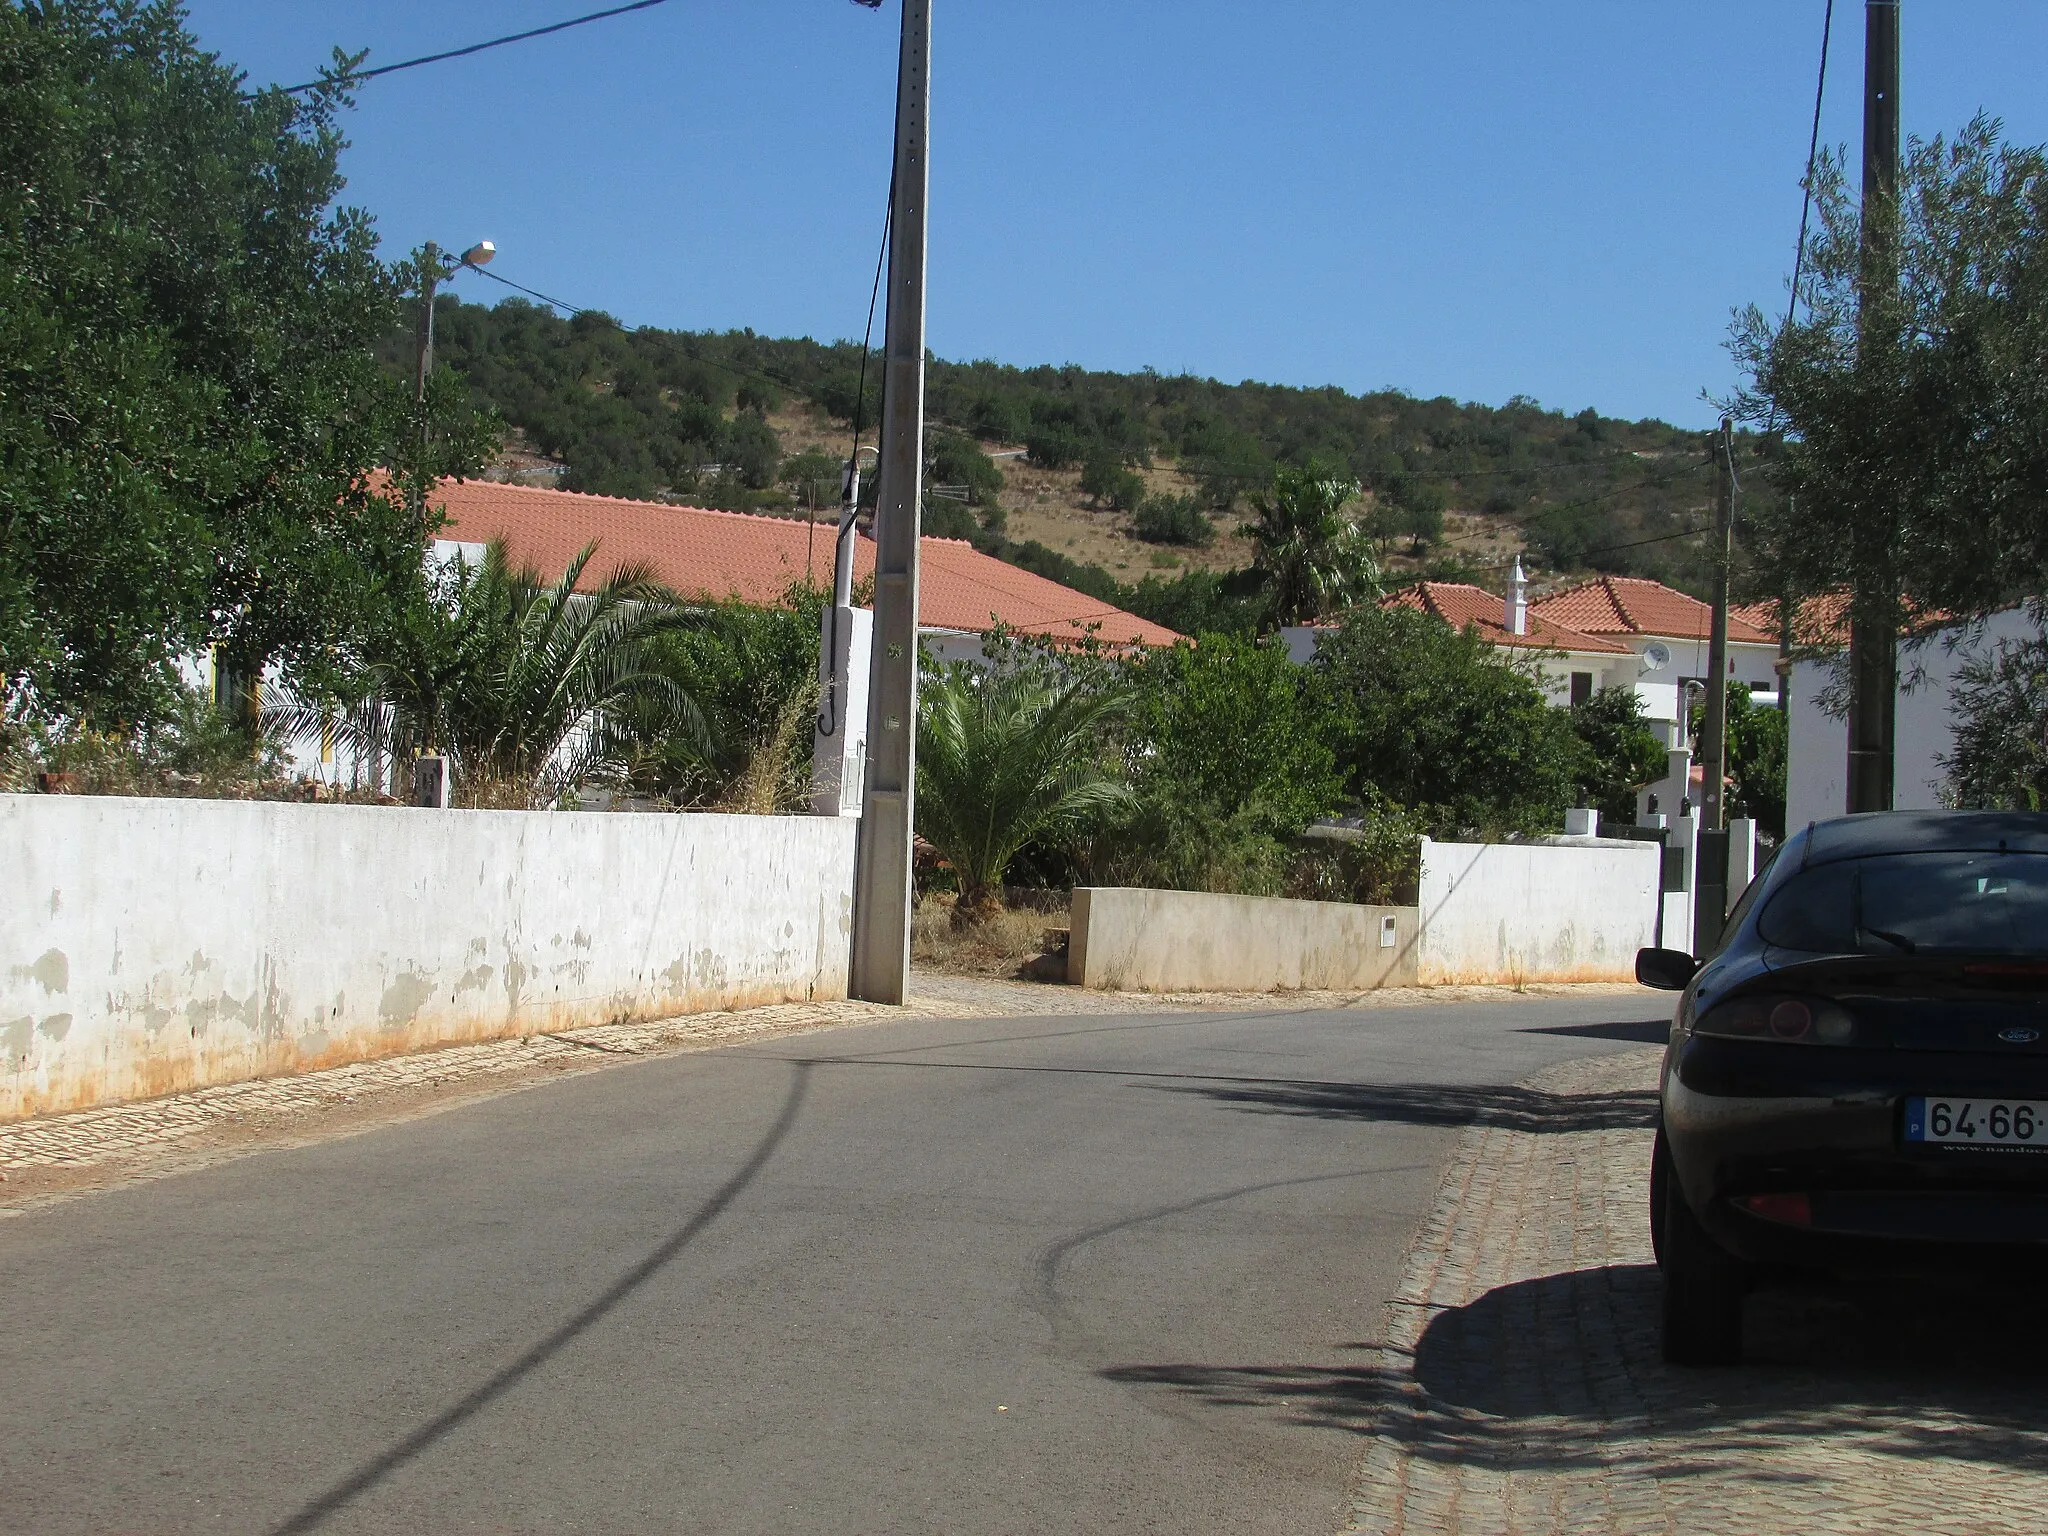 Photo showing: Looking along the Rua de Monte Brito in the neighbourhood Monte Brito to the south of the village of Alte, Algarve, Portugal.